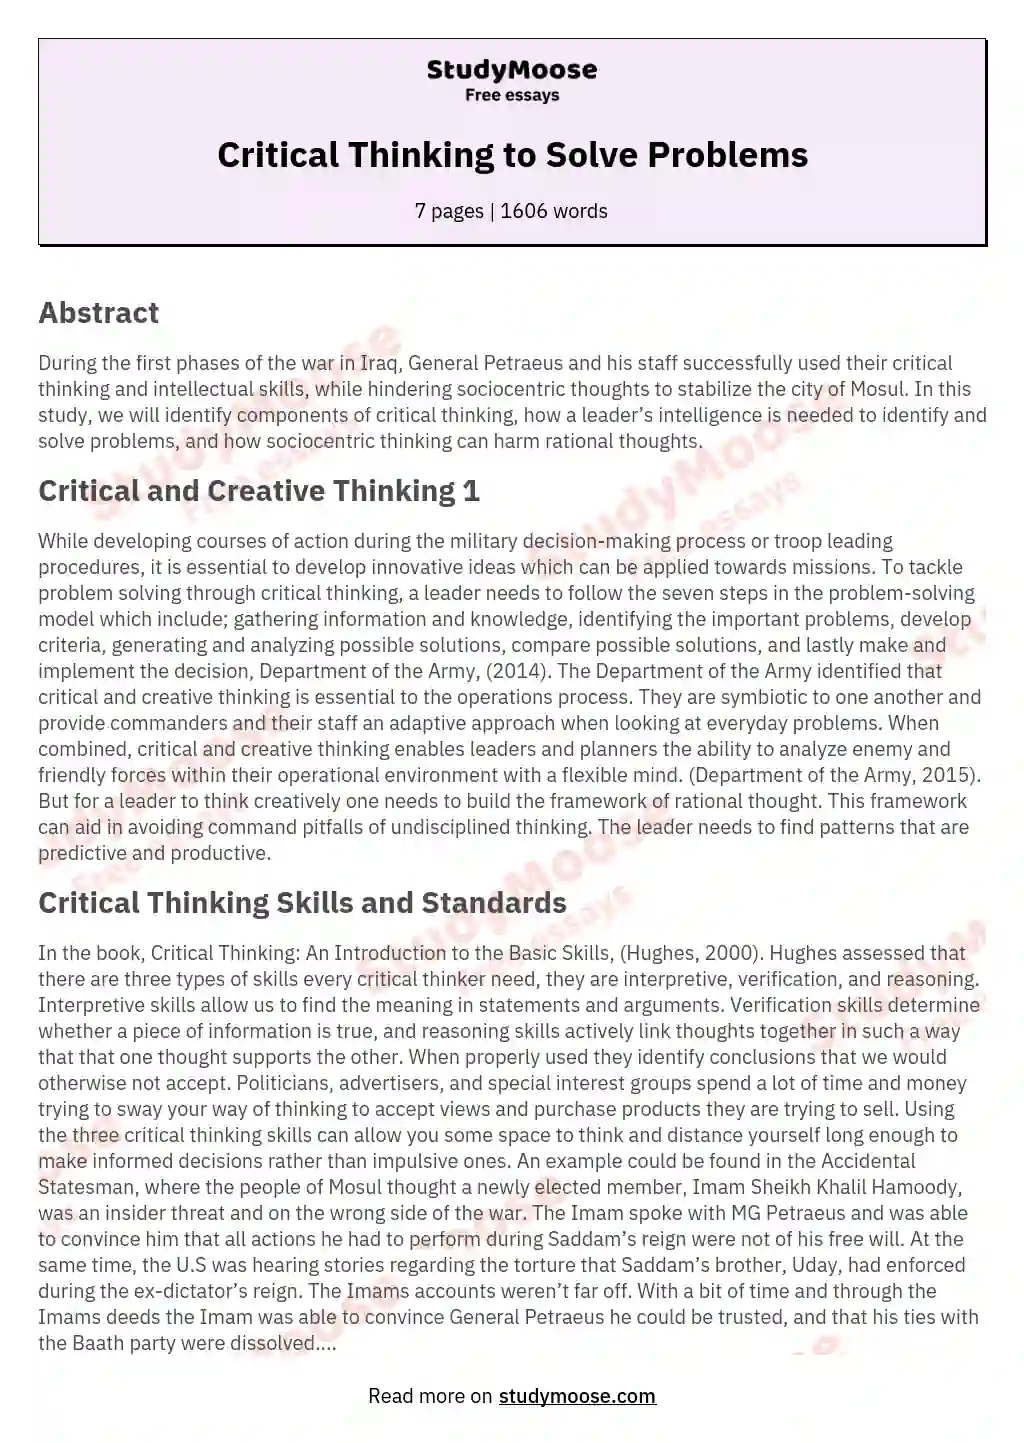 Critical Thinking to Solve Problems essay